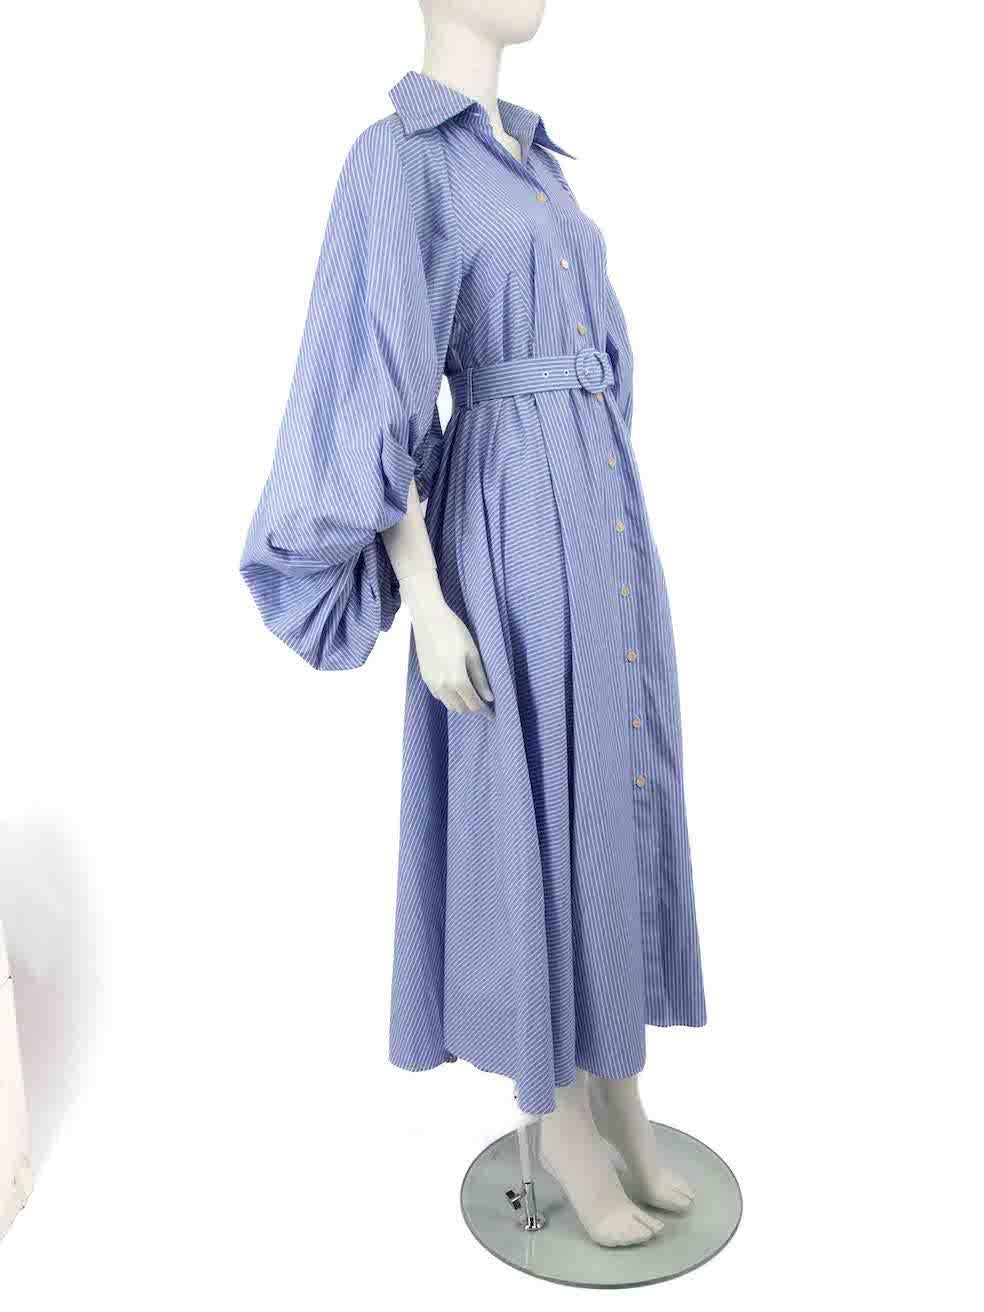 CONDITION is Never worn, with tags. No visible wear to dress is evident on this new palmer//harding designer resale item.
 
 
 
 Details
 
 
 Model: Healing Dress
 
 Blue
 
 Cotton
 
 Shirt dress
 
 Striped pattern
 
 Midi
 
 Long puff sleeves
 
